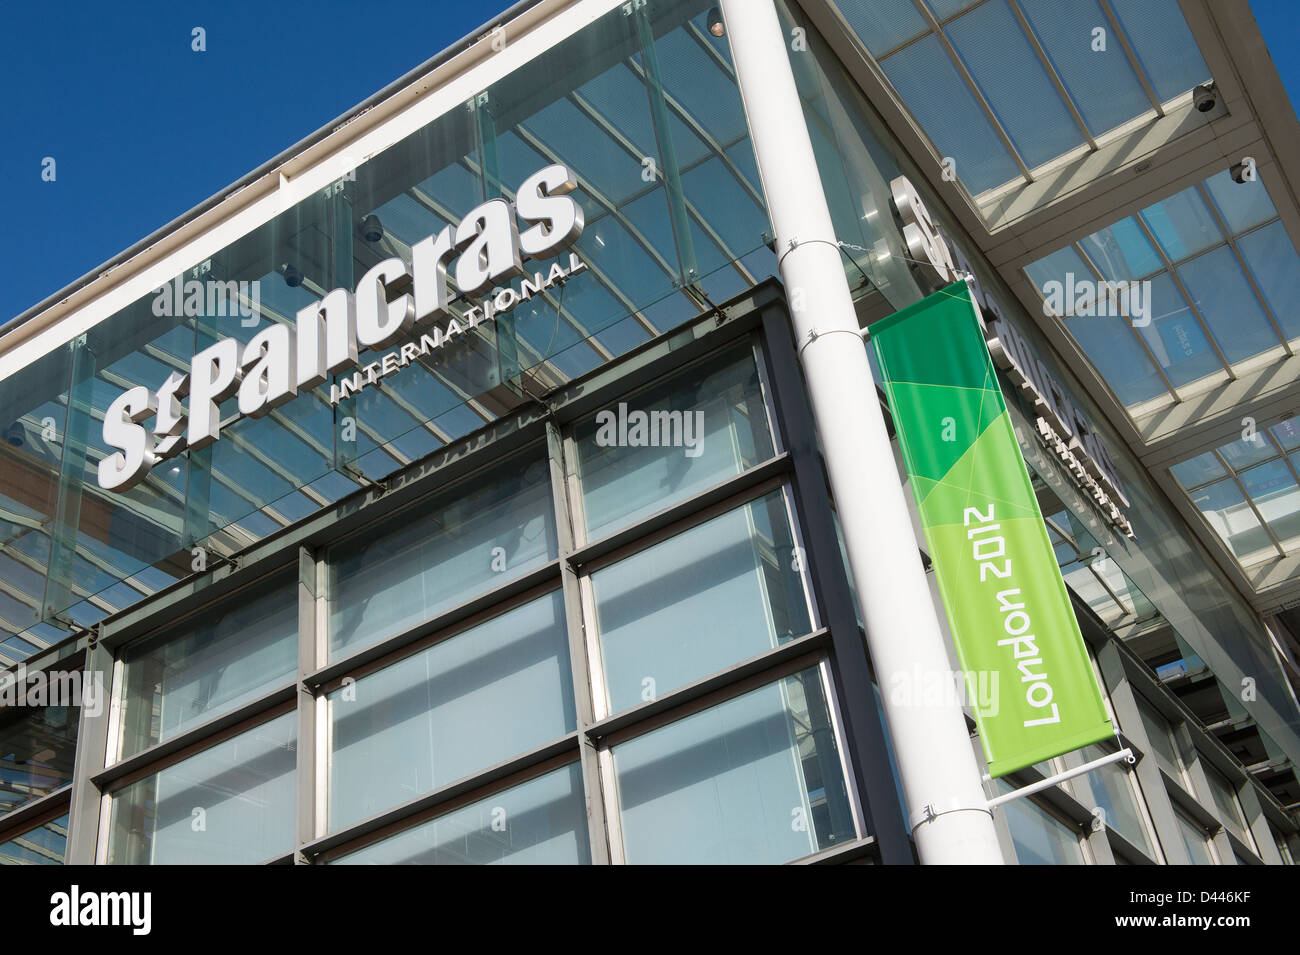 Entrance to St Pancras International railway station in London, during the 2012 olympic games England. Stock Photo